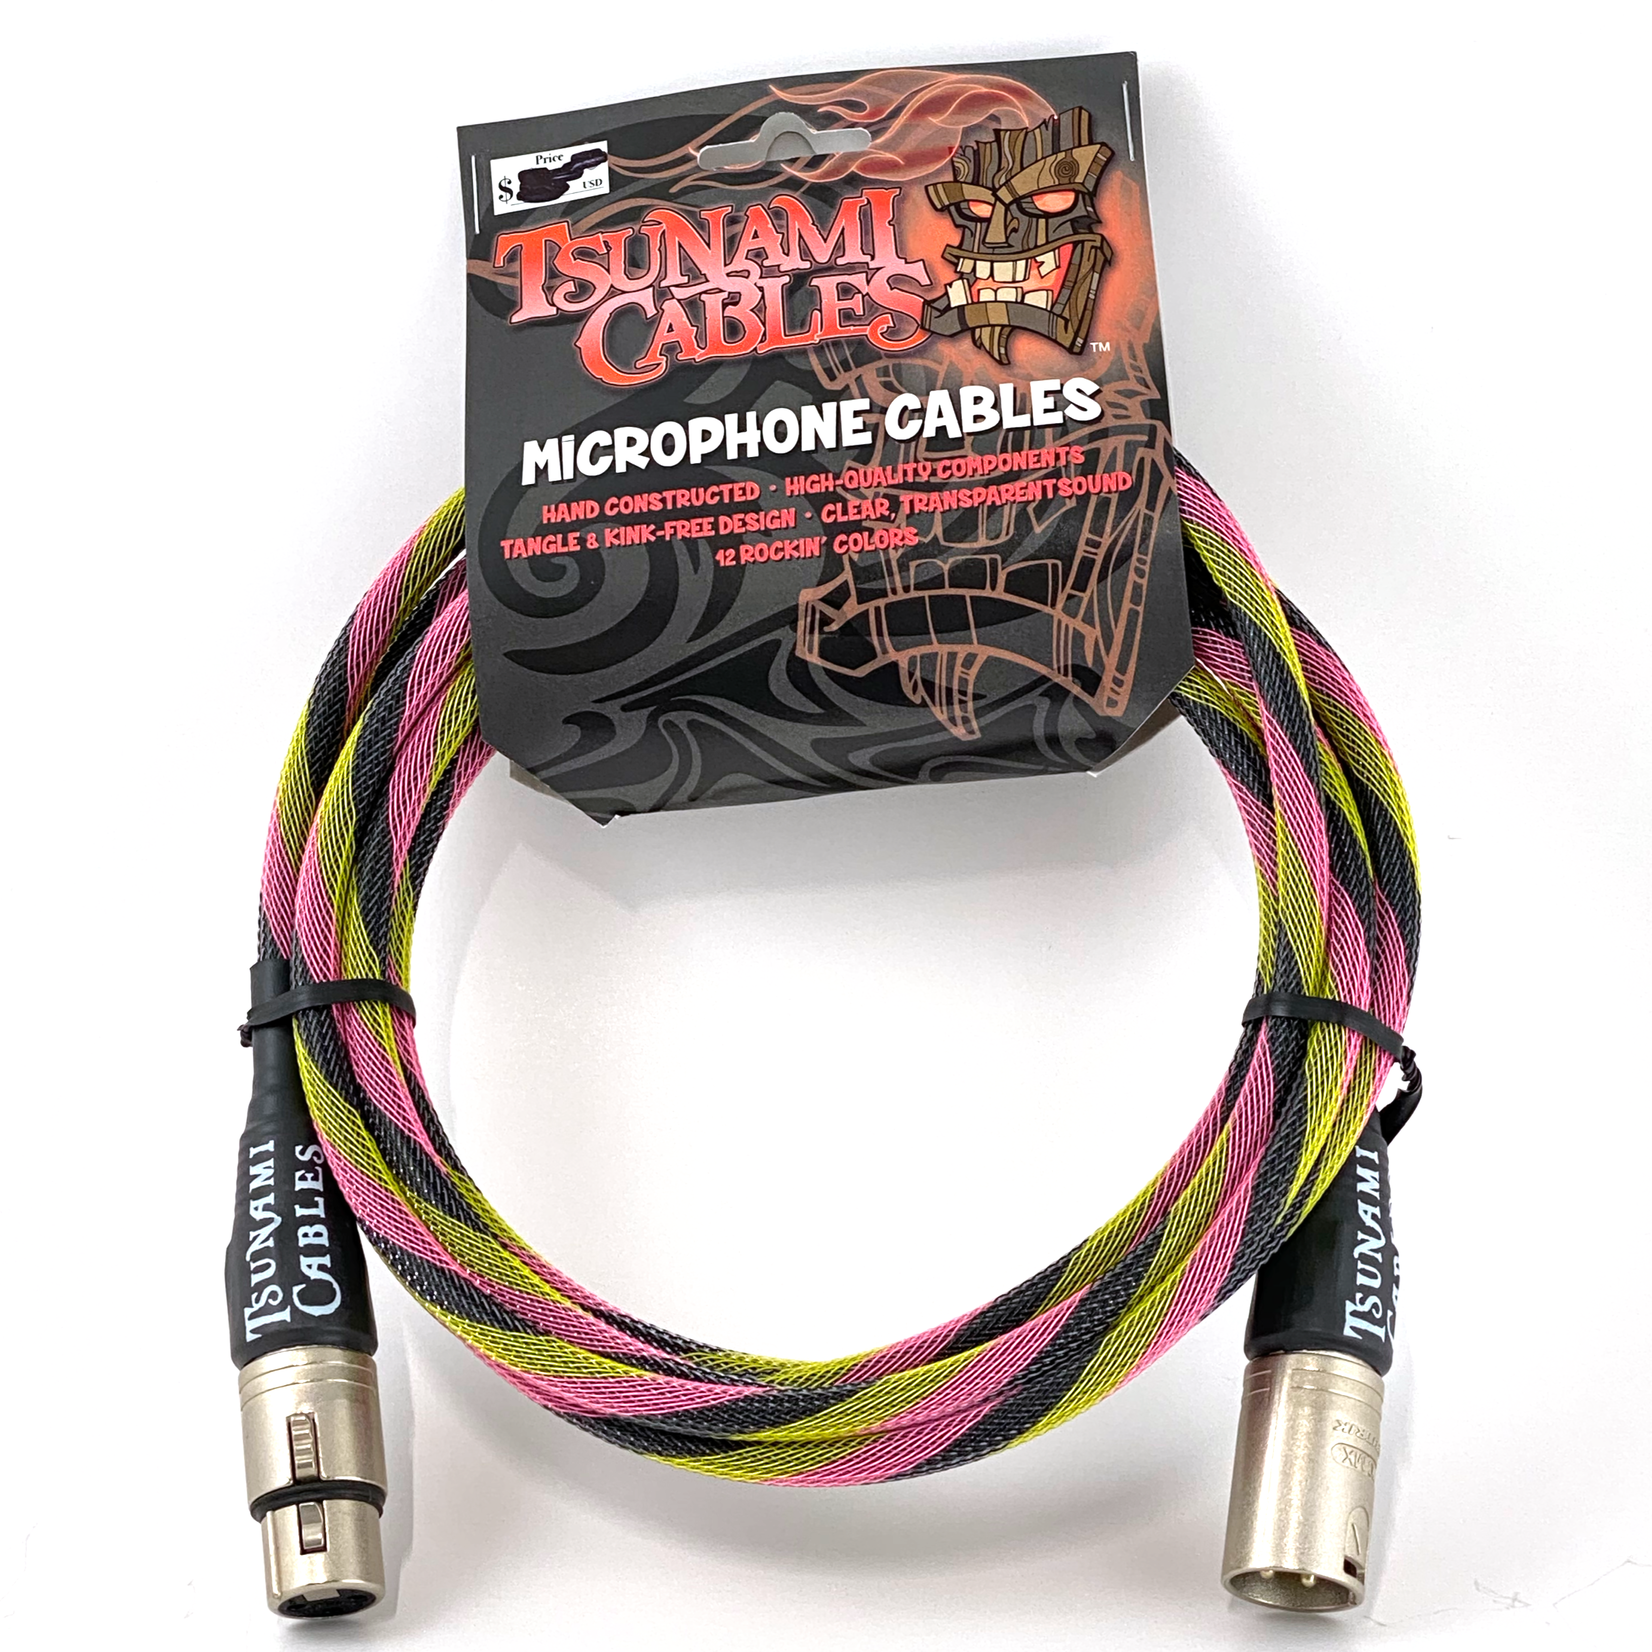 Tsunami Cables Tsunami Cables 10' Handcrafted Premium Microphone XLR Cable "Hip-Hop" (Black/Yellow/Pink)